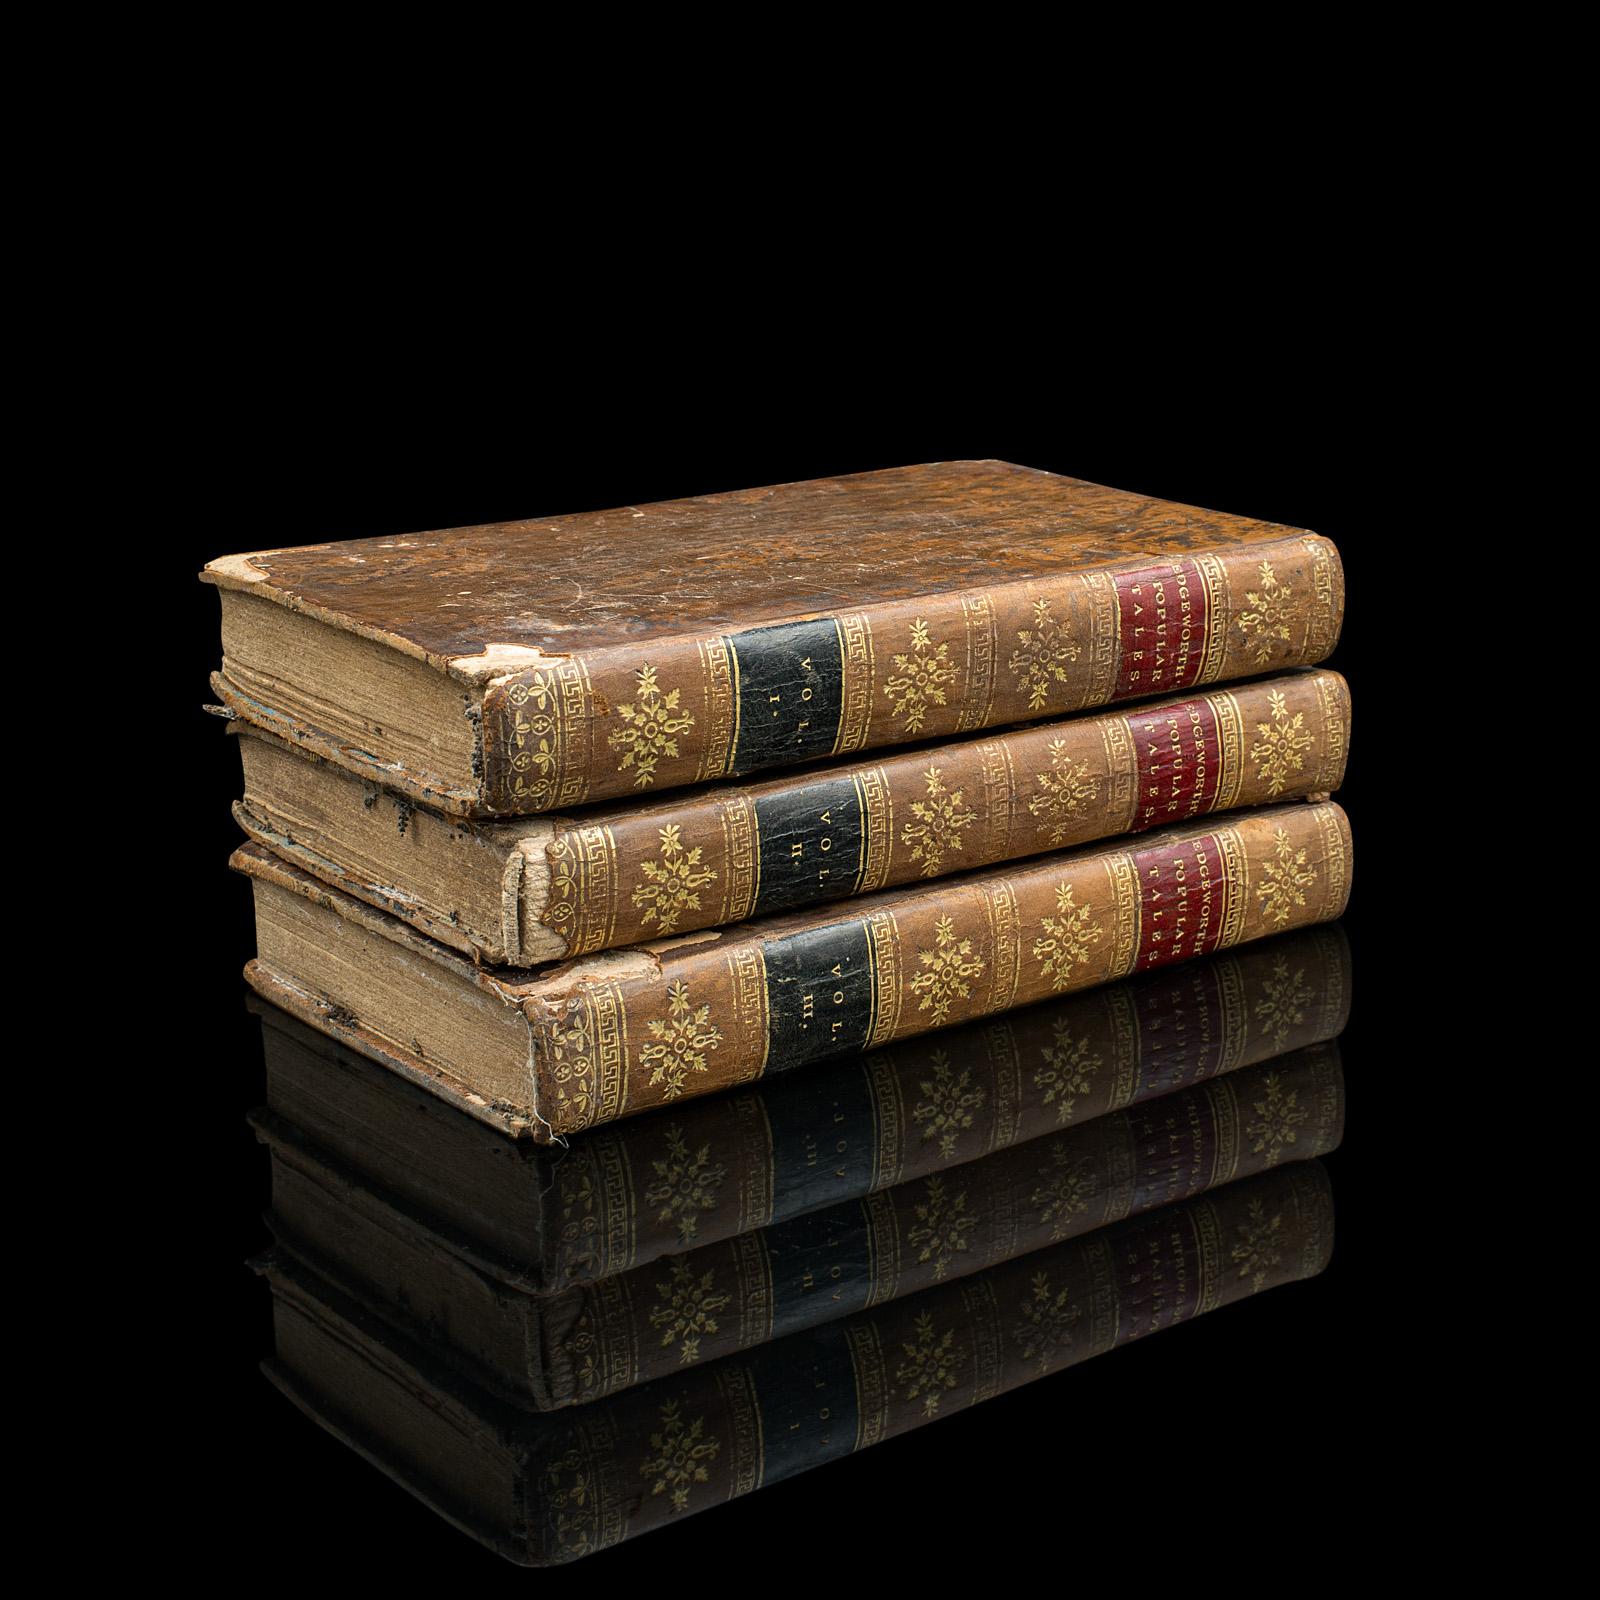 This is a set of 3 antique fiction books, Popular Tales by Maria Edgeworth. An English language, hard bound 3 volume set of novels, dating to the Georgian period, published 1814.

A prolific novelist of adult and children's literature, Maria